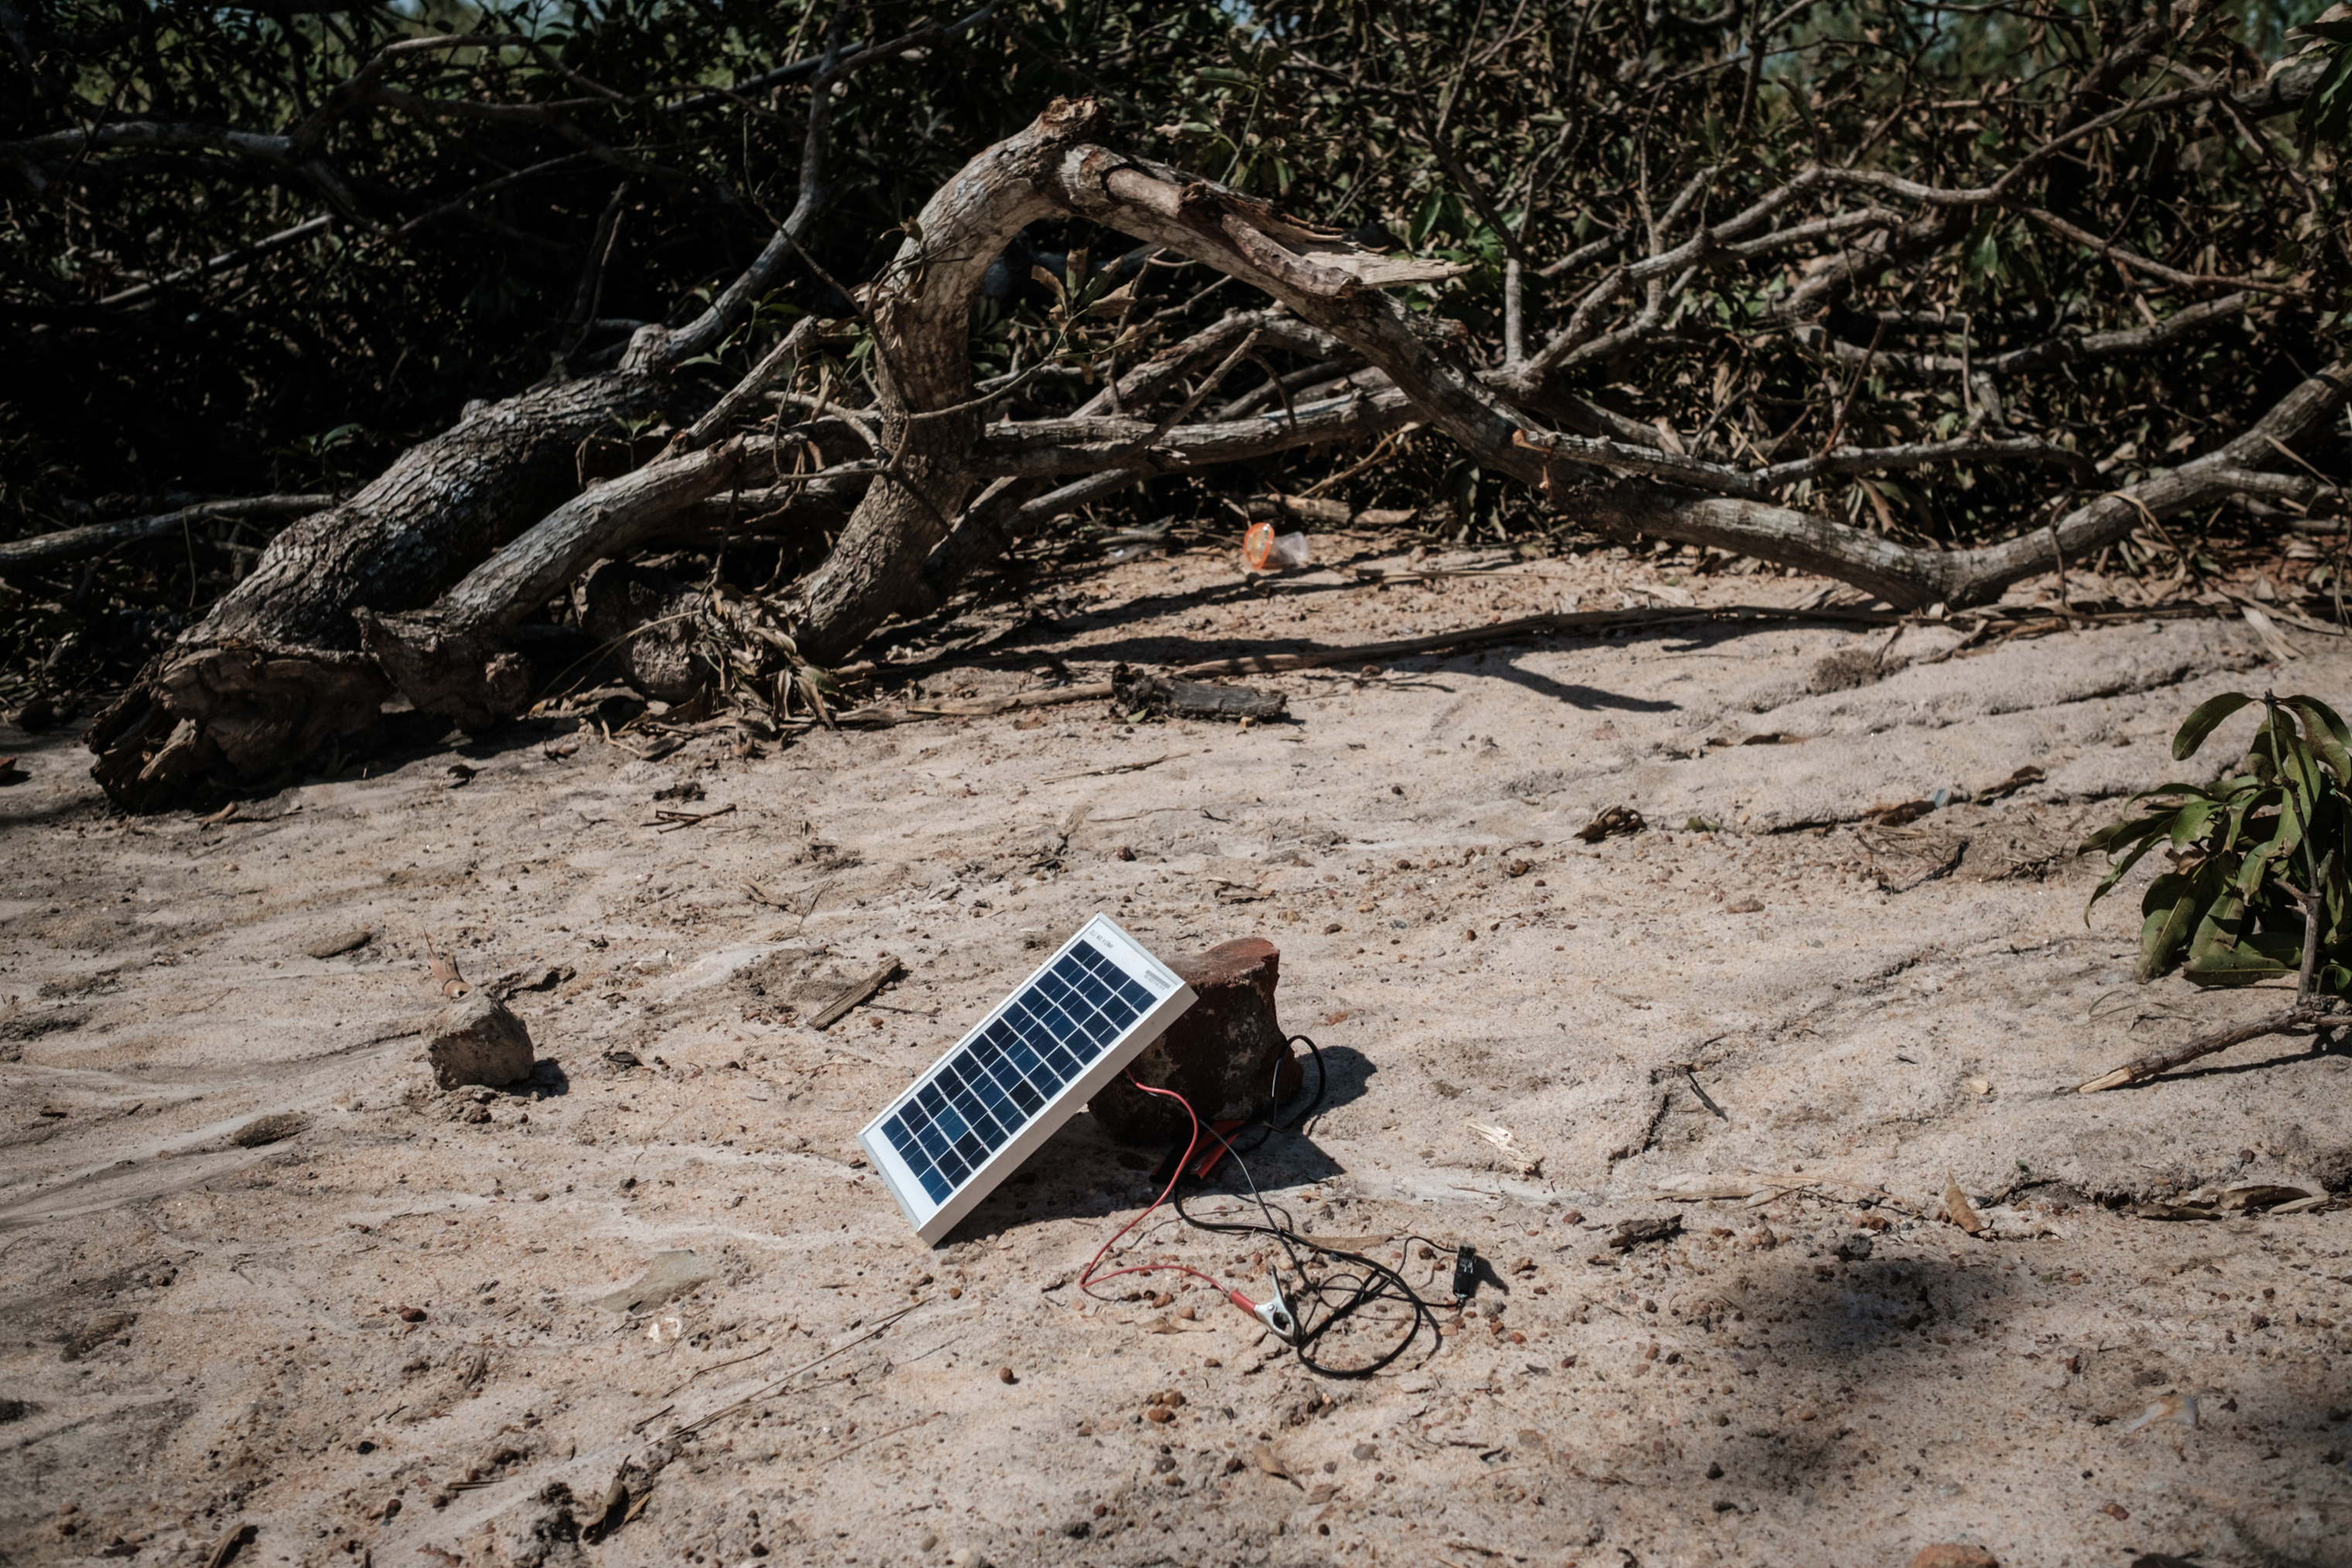 A solar charger is seen beside trees destroyed by cyclone Idai in Tica, Mozambique, on March 24, 2019. (Yasuyoshi Chiba—AFP/Getty Images)